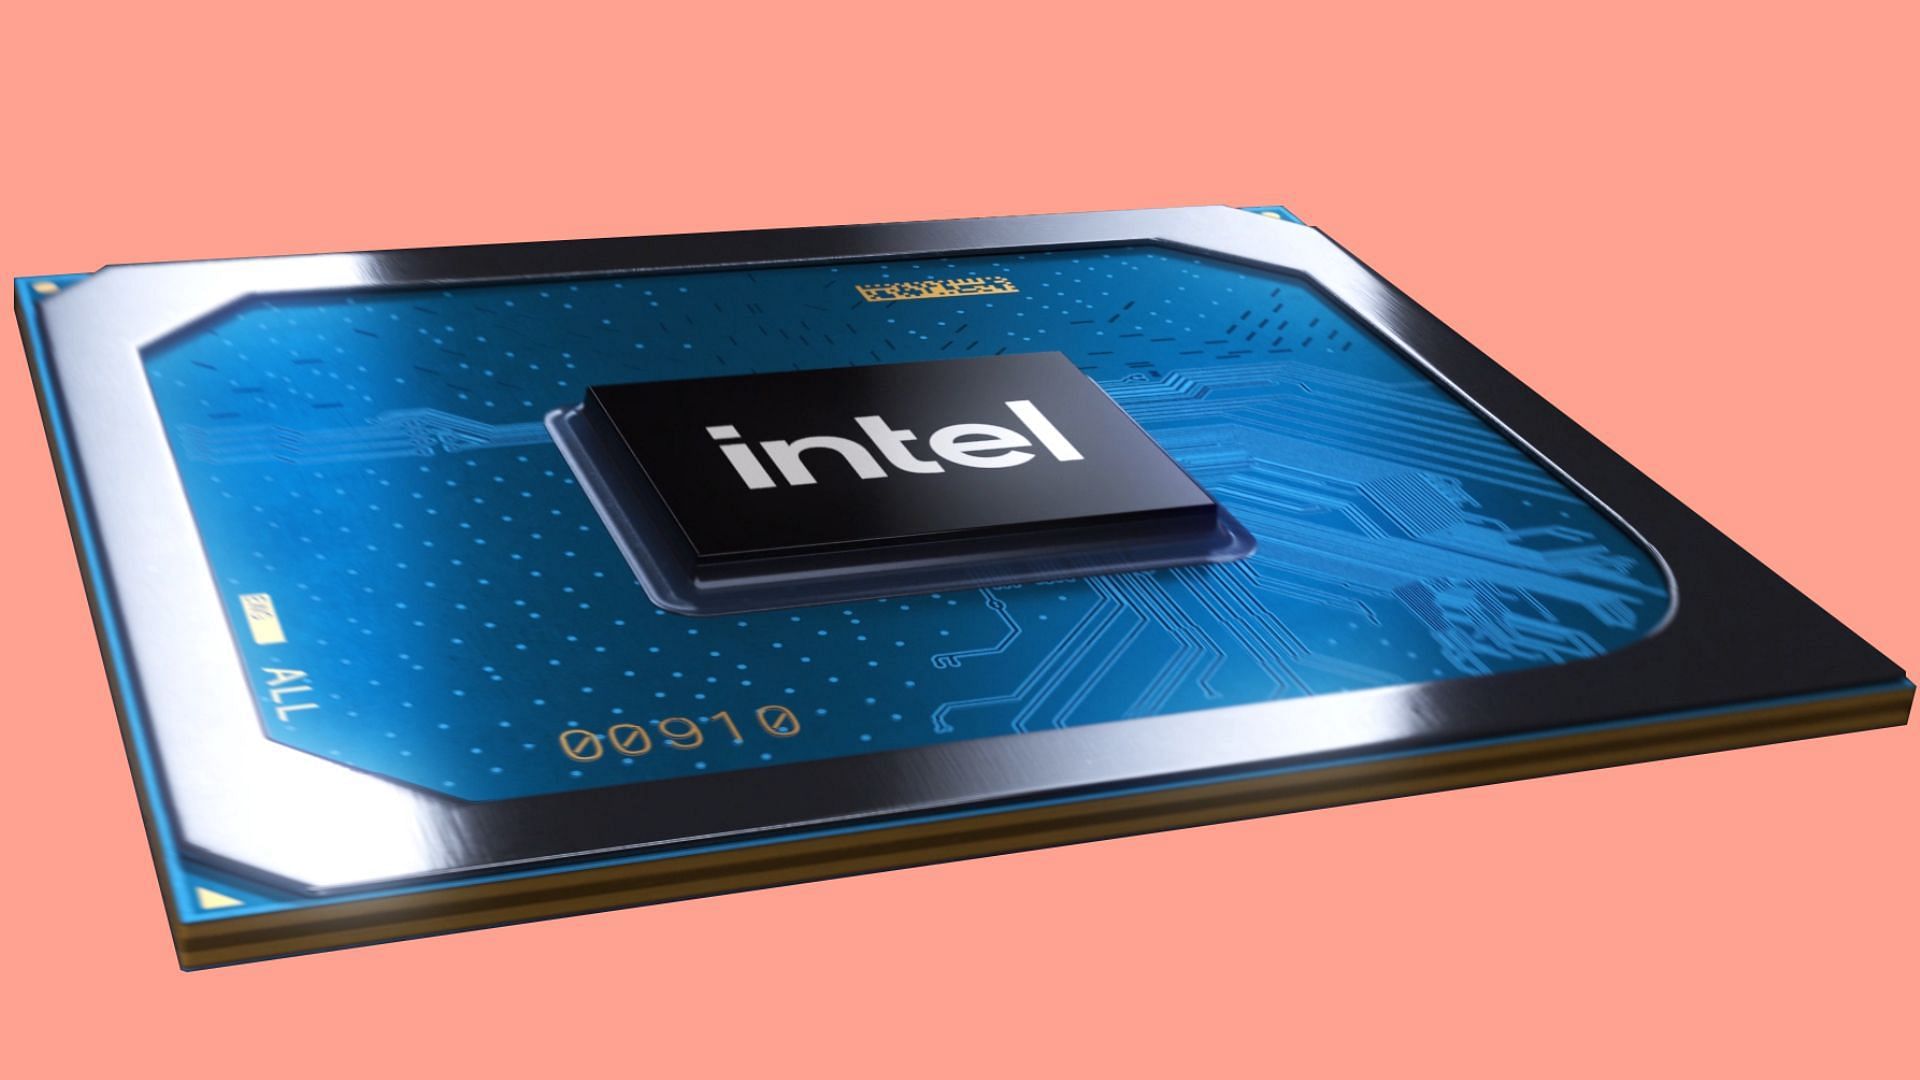 This Intel Xe-powered PC handheld might be the Switch alternative